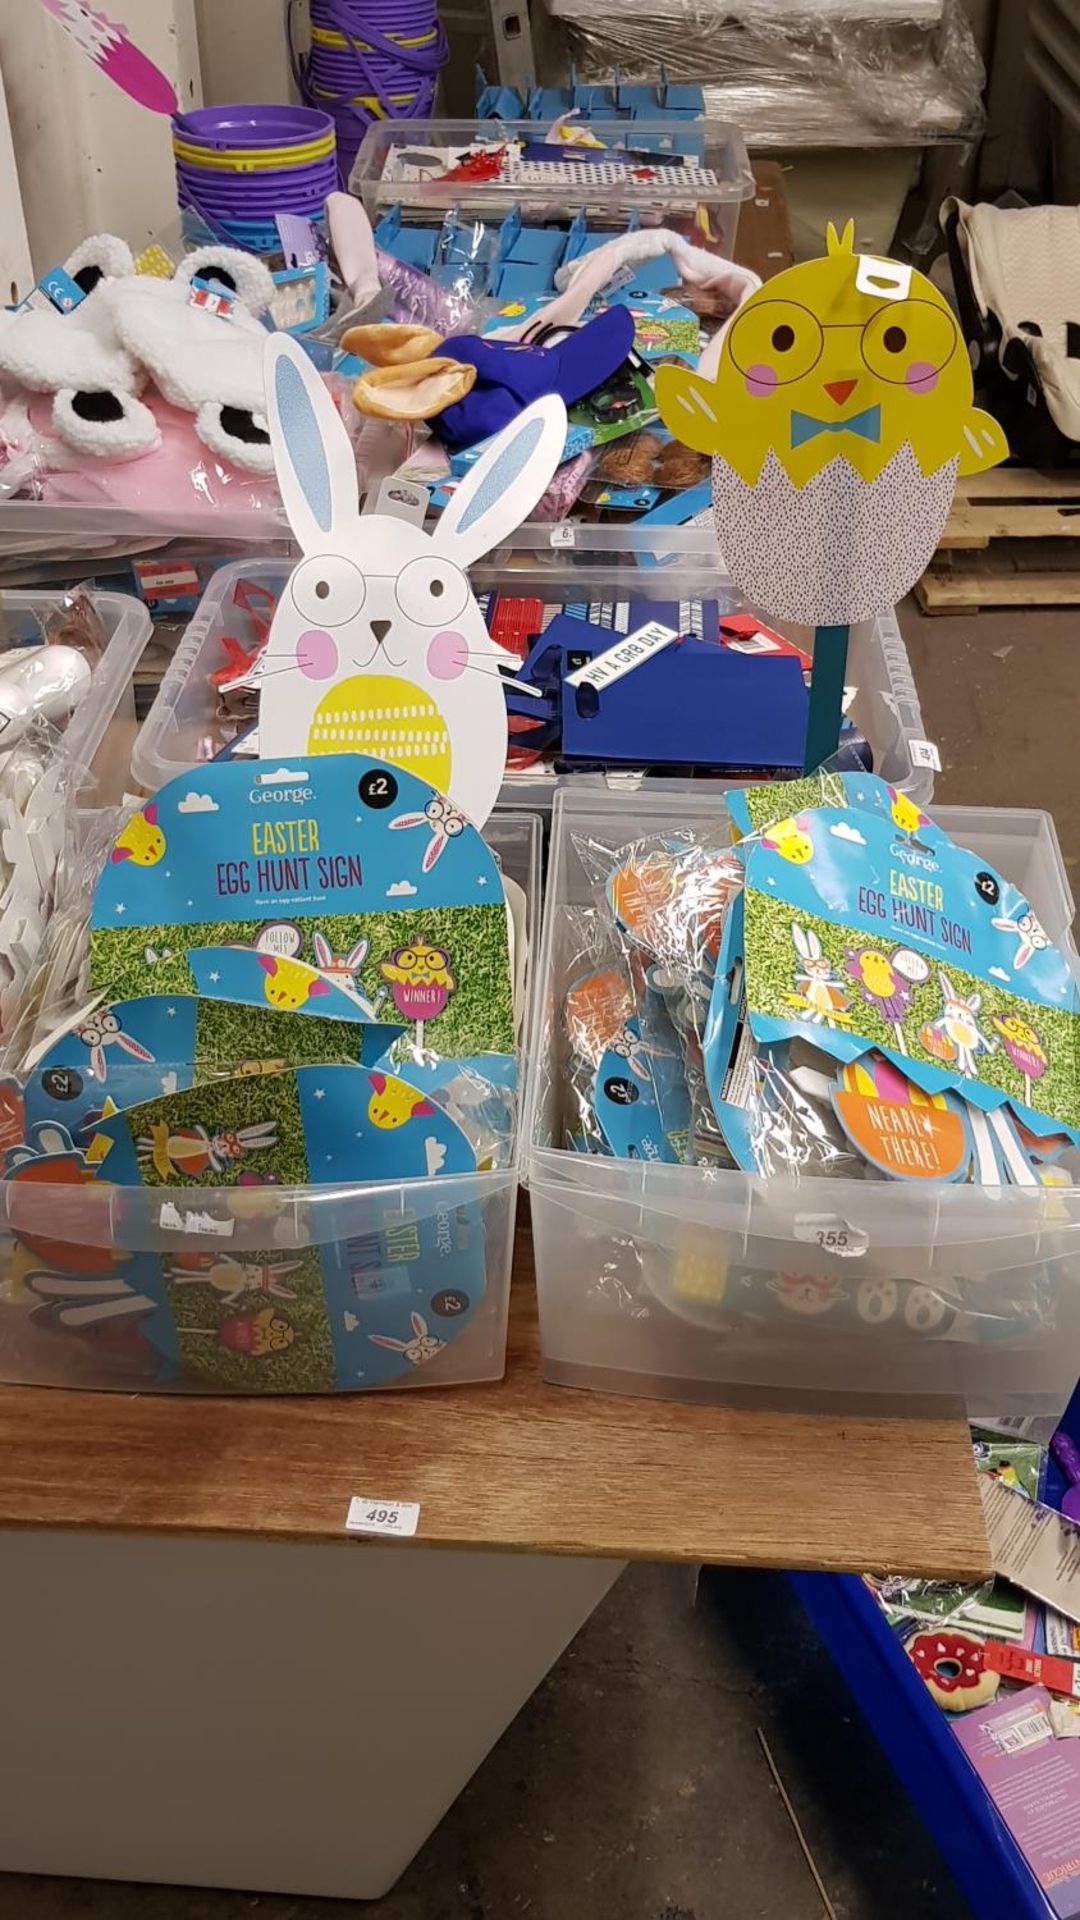 Contents of 2 Boxes – Easter Egg Hunt Si